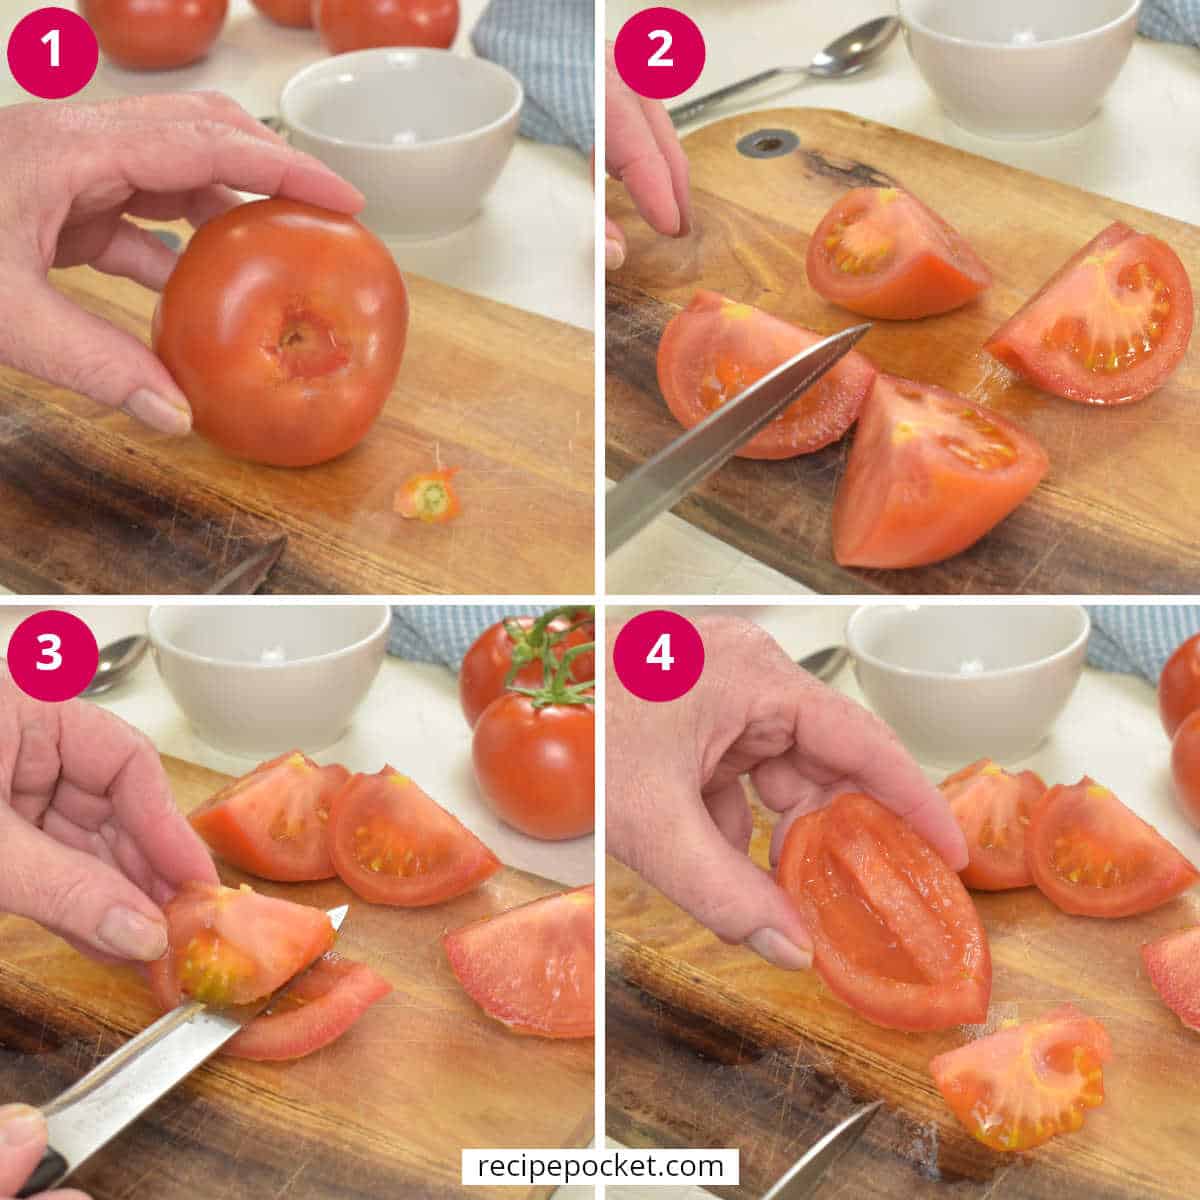 Four part image showing seeds being remove for quarters slices of tomatoes.